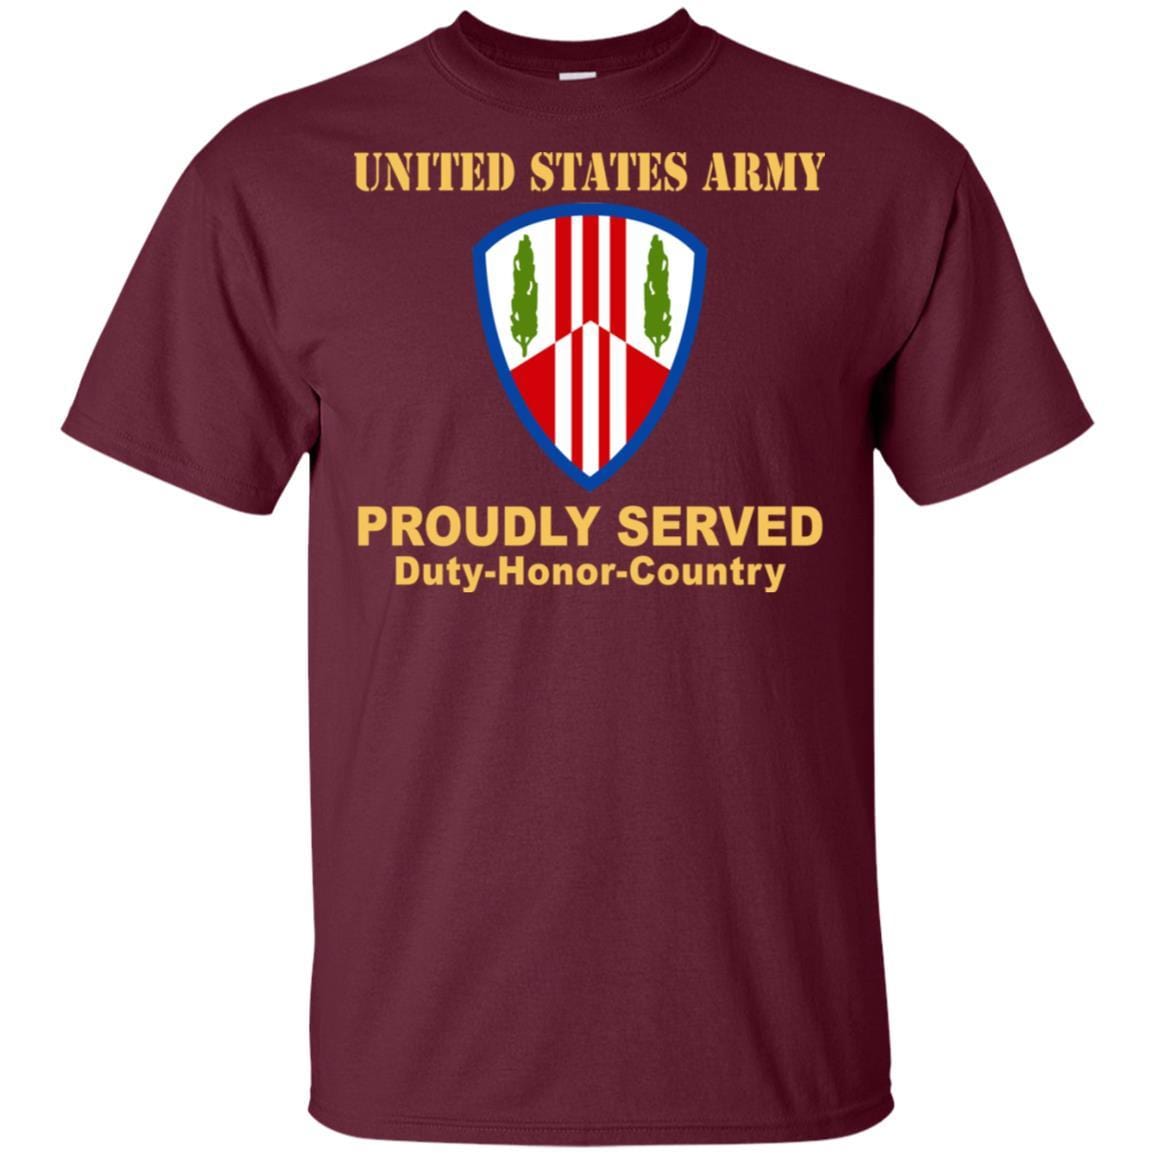 US ARMY 369TH SUSTAINMENT BRIGADE - Proudly Served T-Shirt On Front For Men-TShirt-Army-Veterans Nation